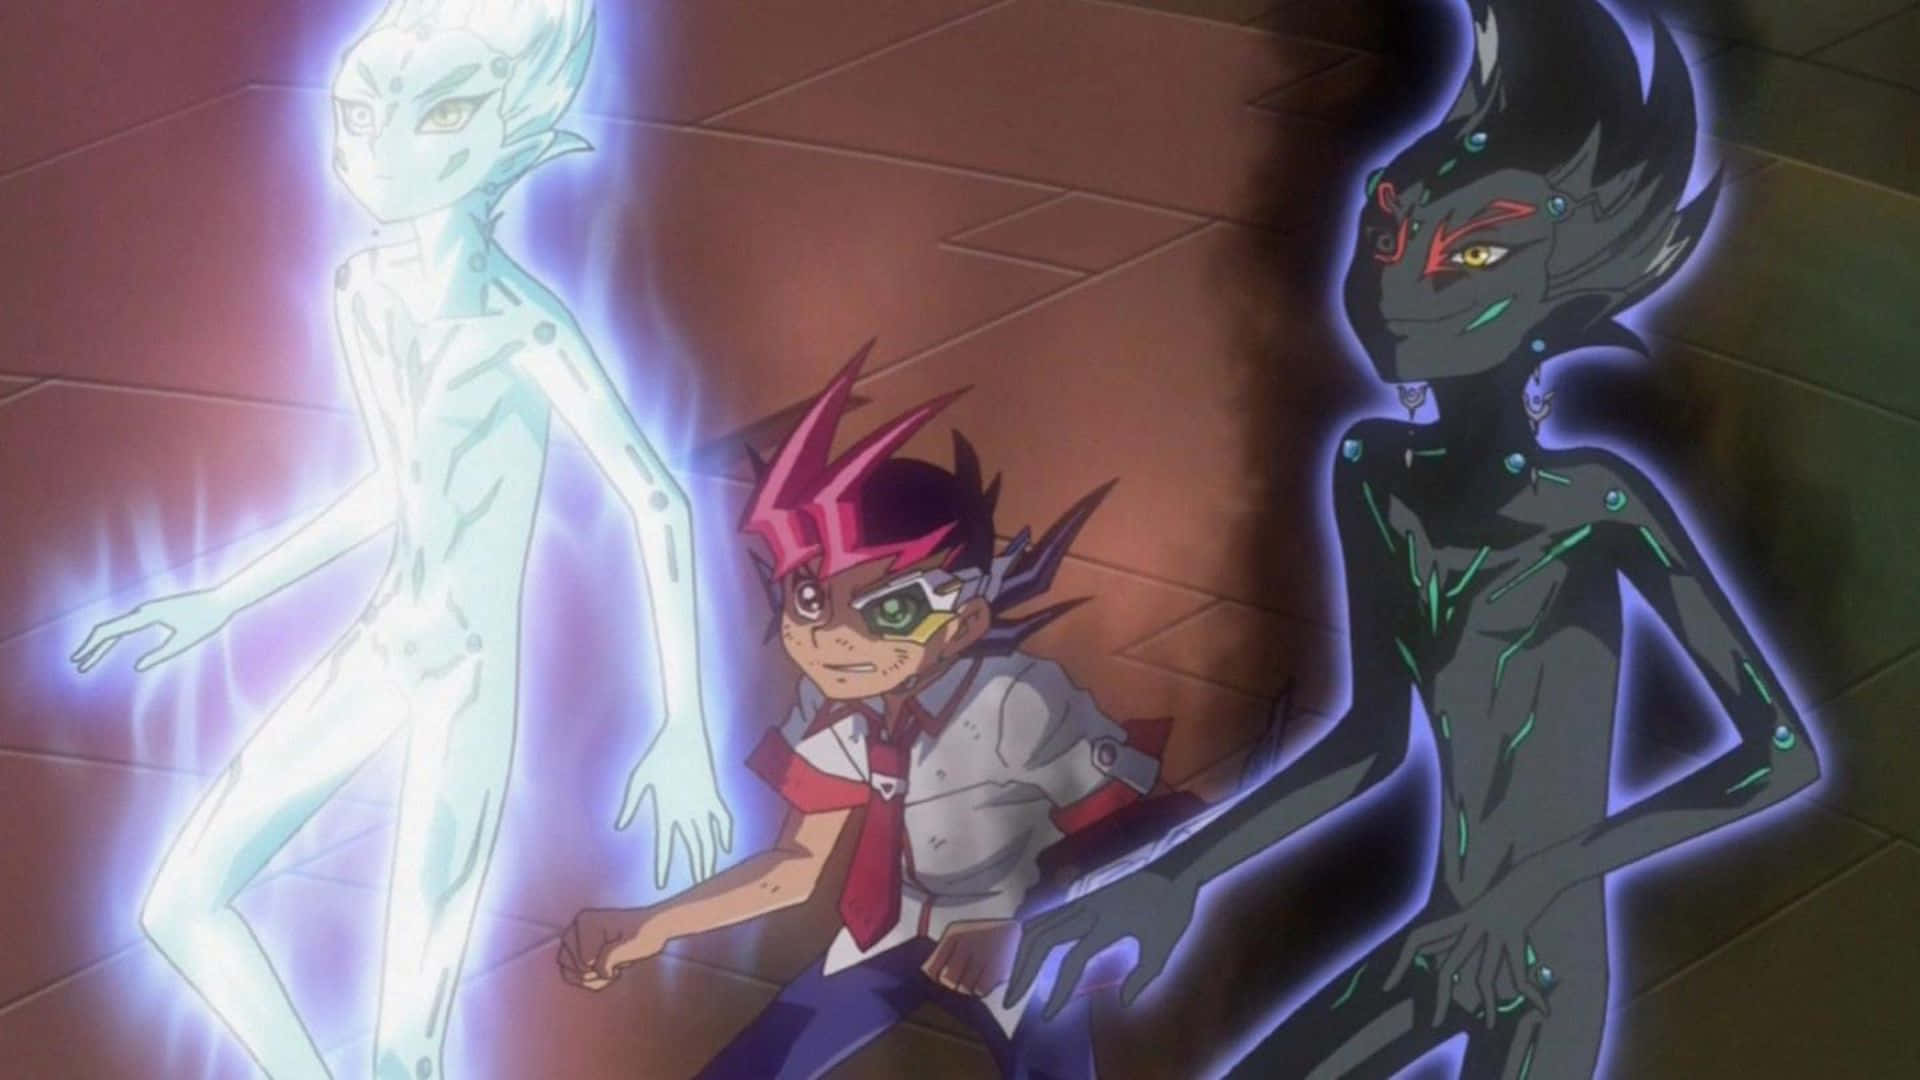 Caption: Yu-Gi-Oh! ZEXAL's Astral - Intense Duel Action Wallpaper